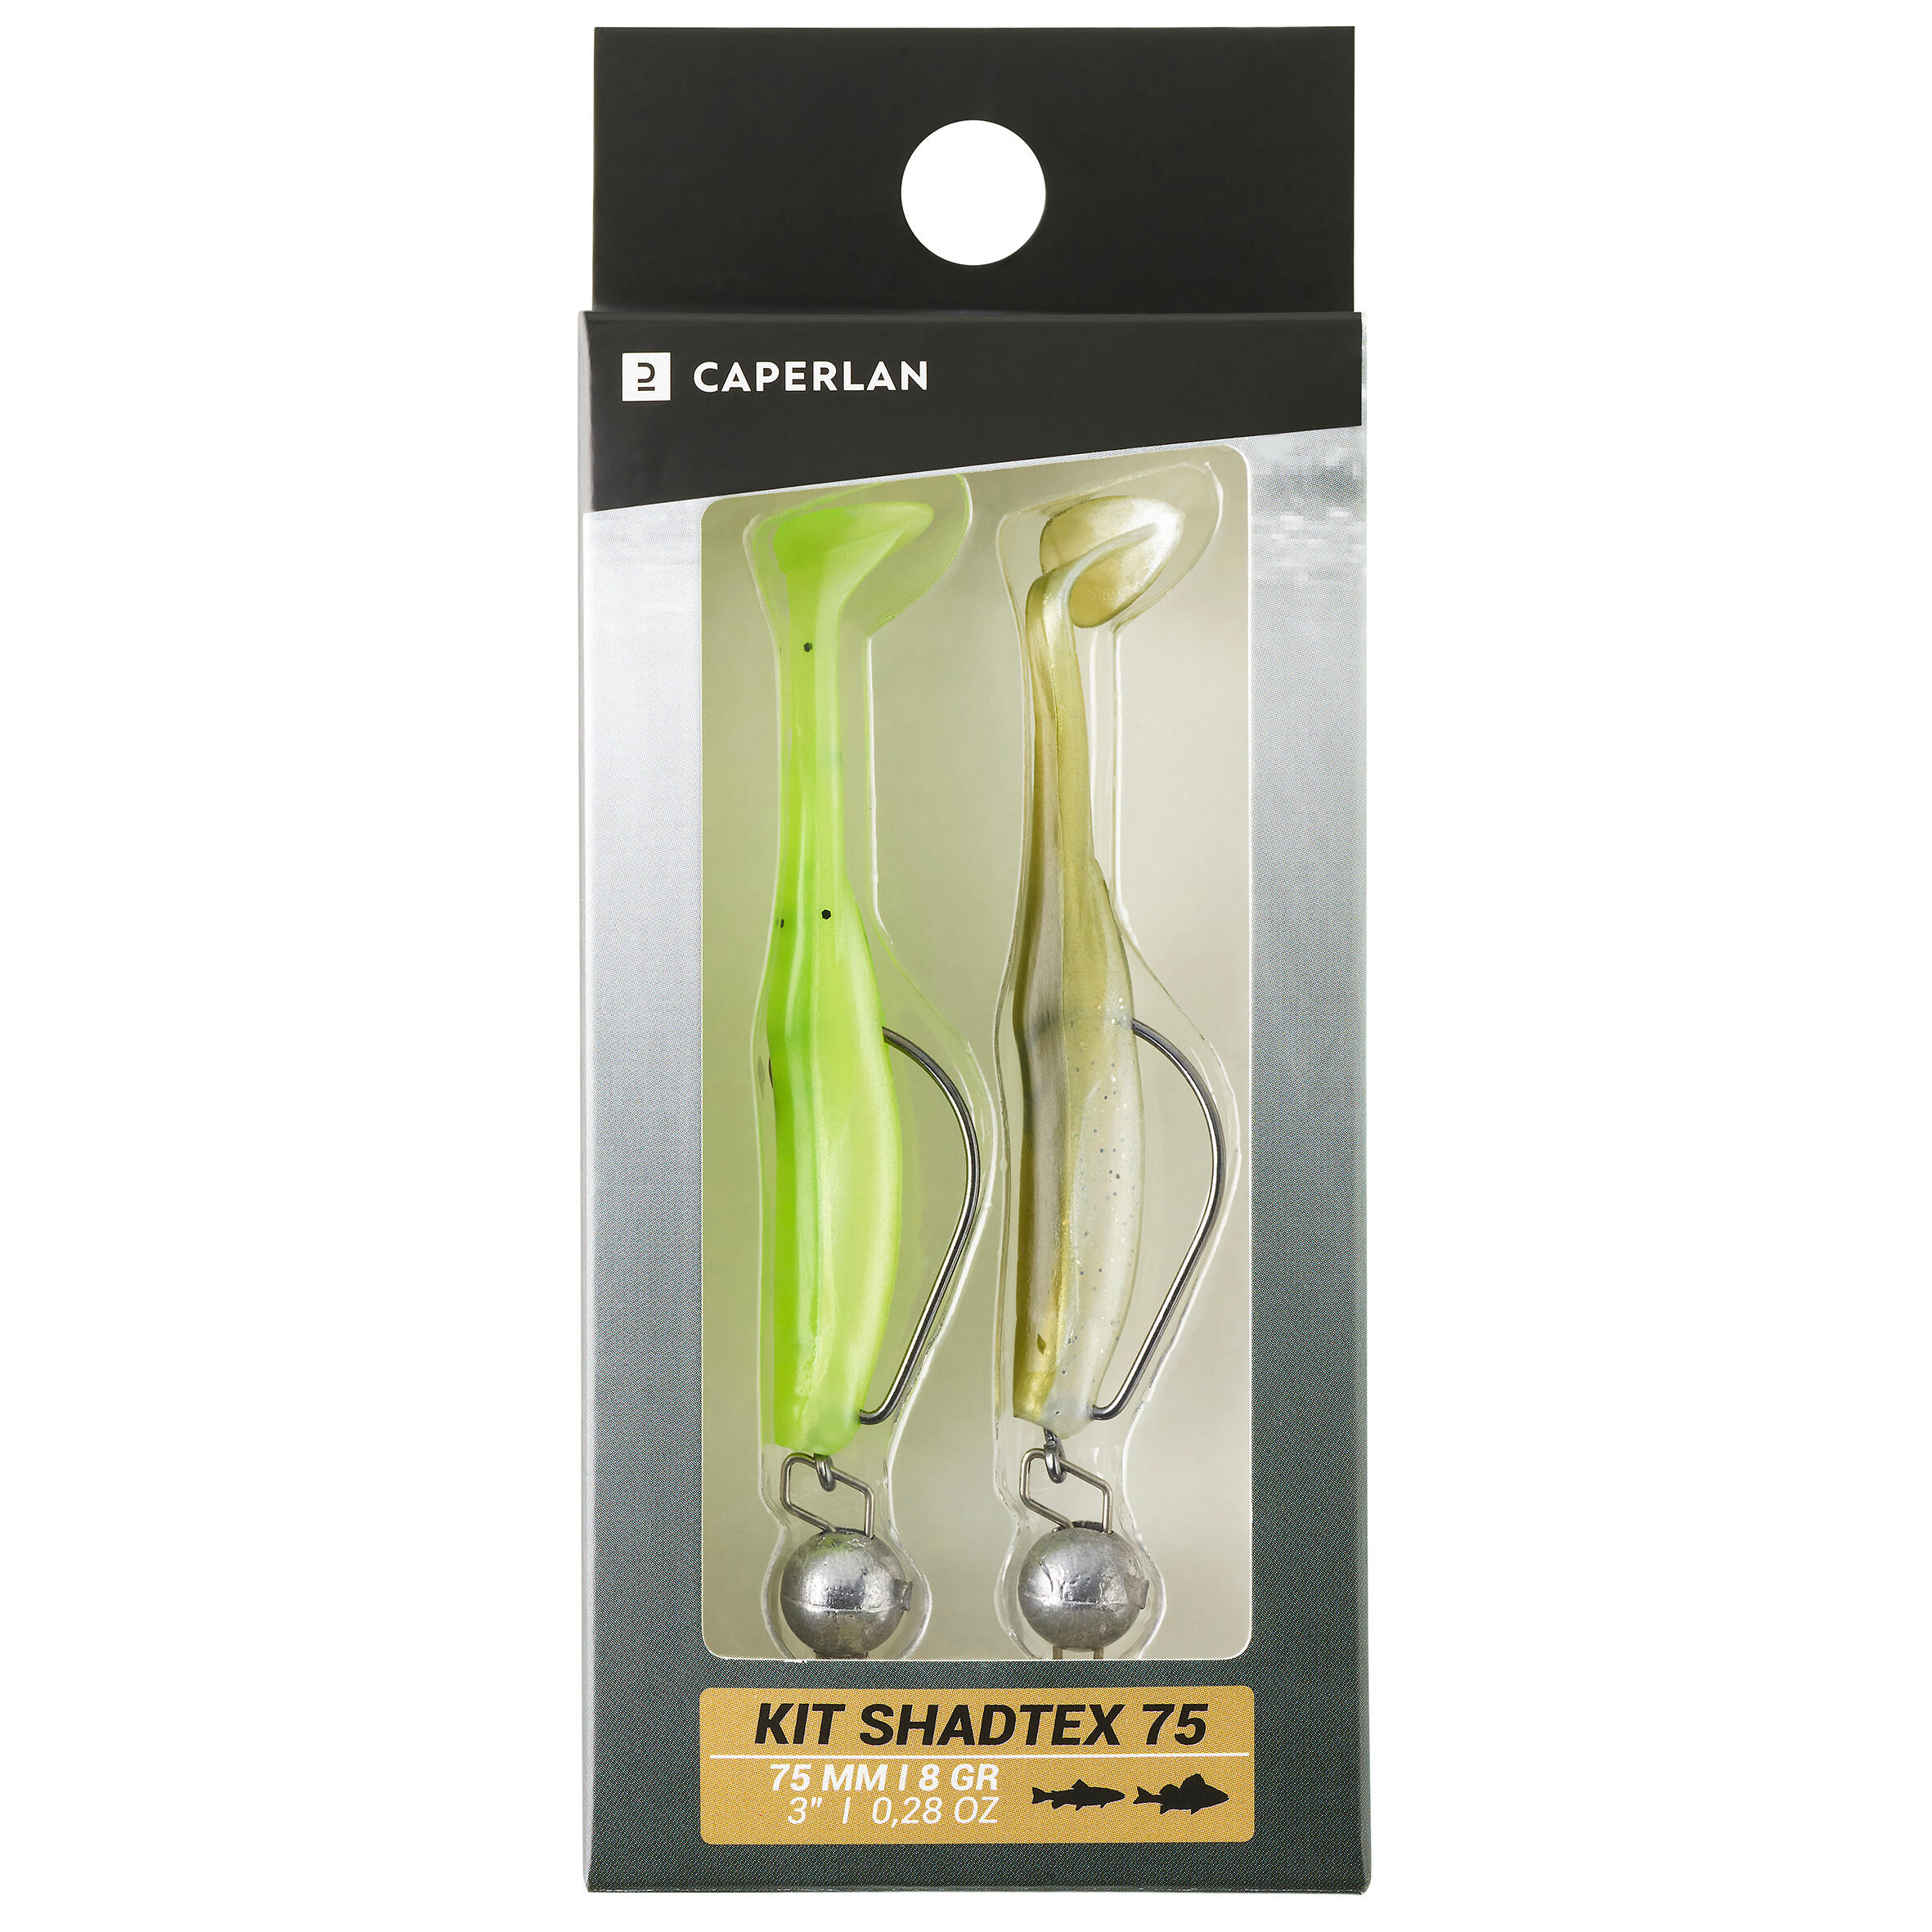 Shadtex 75 lure fishing soft lure kit - Vert fluo, Olive green